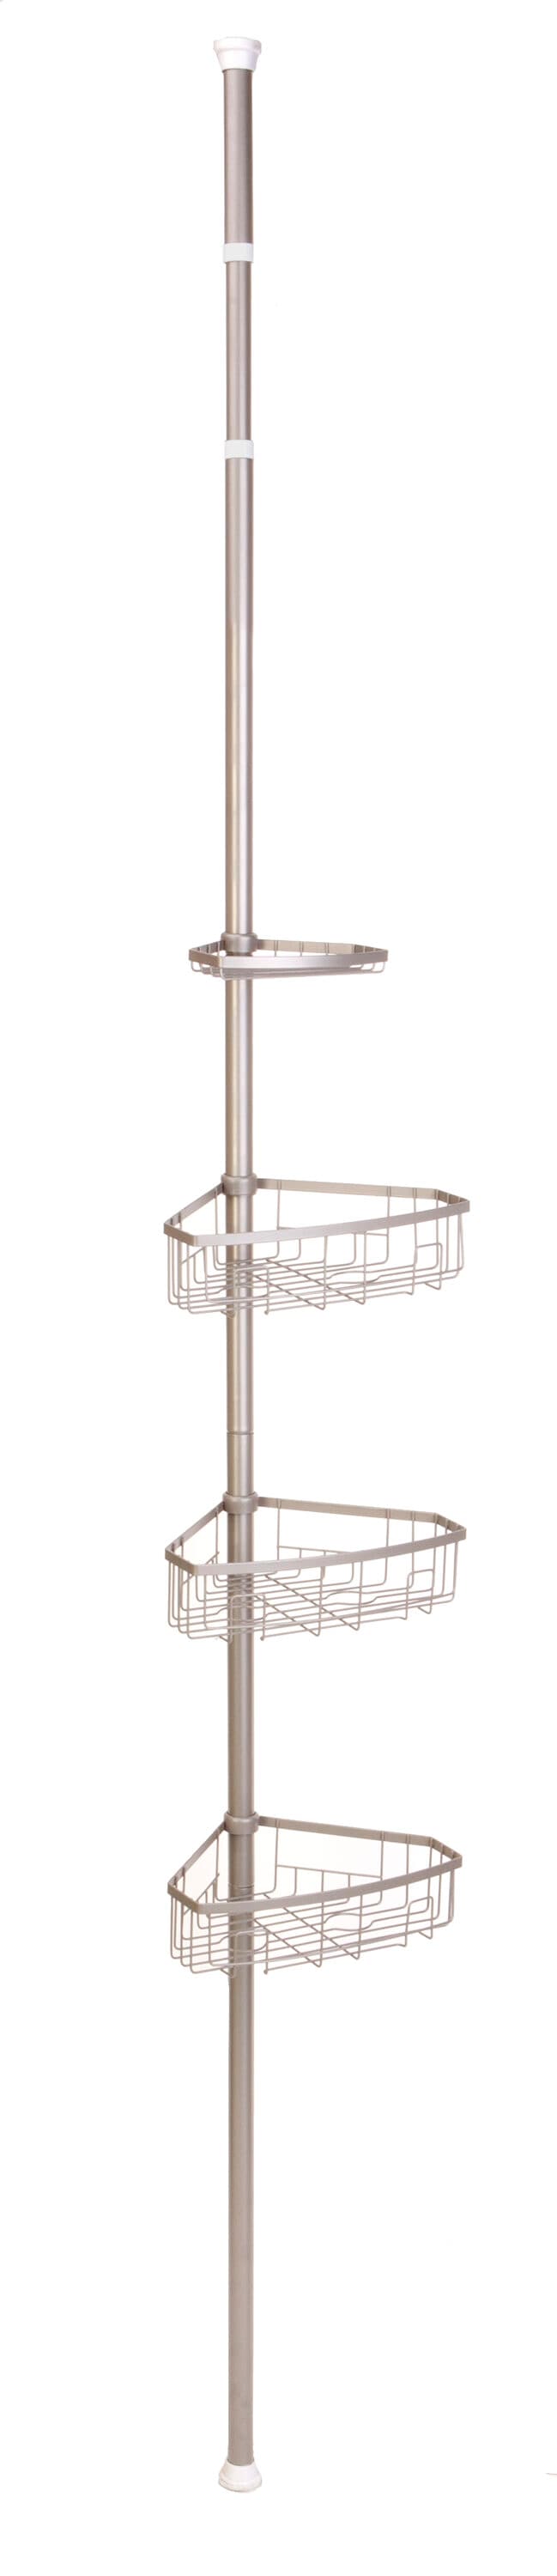 Style Selections Satin Nickel Steel 4-Shelf Tension Pole Freestanding Shower  Caddy 10.5-in x 8.5-in at